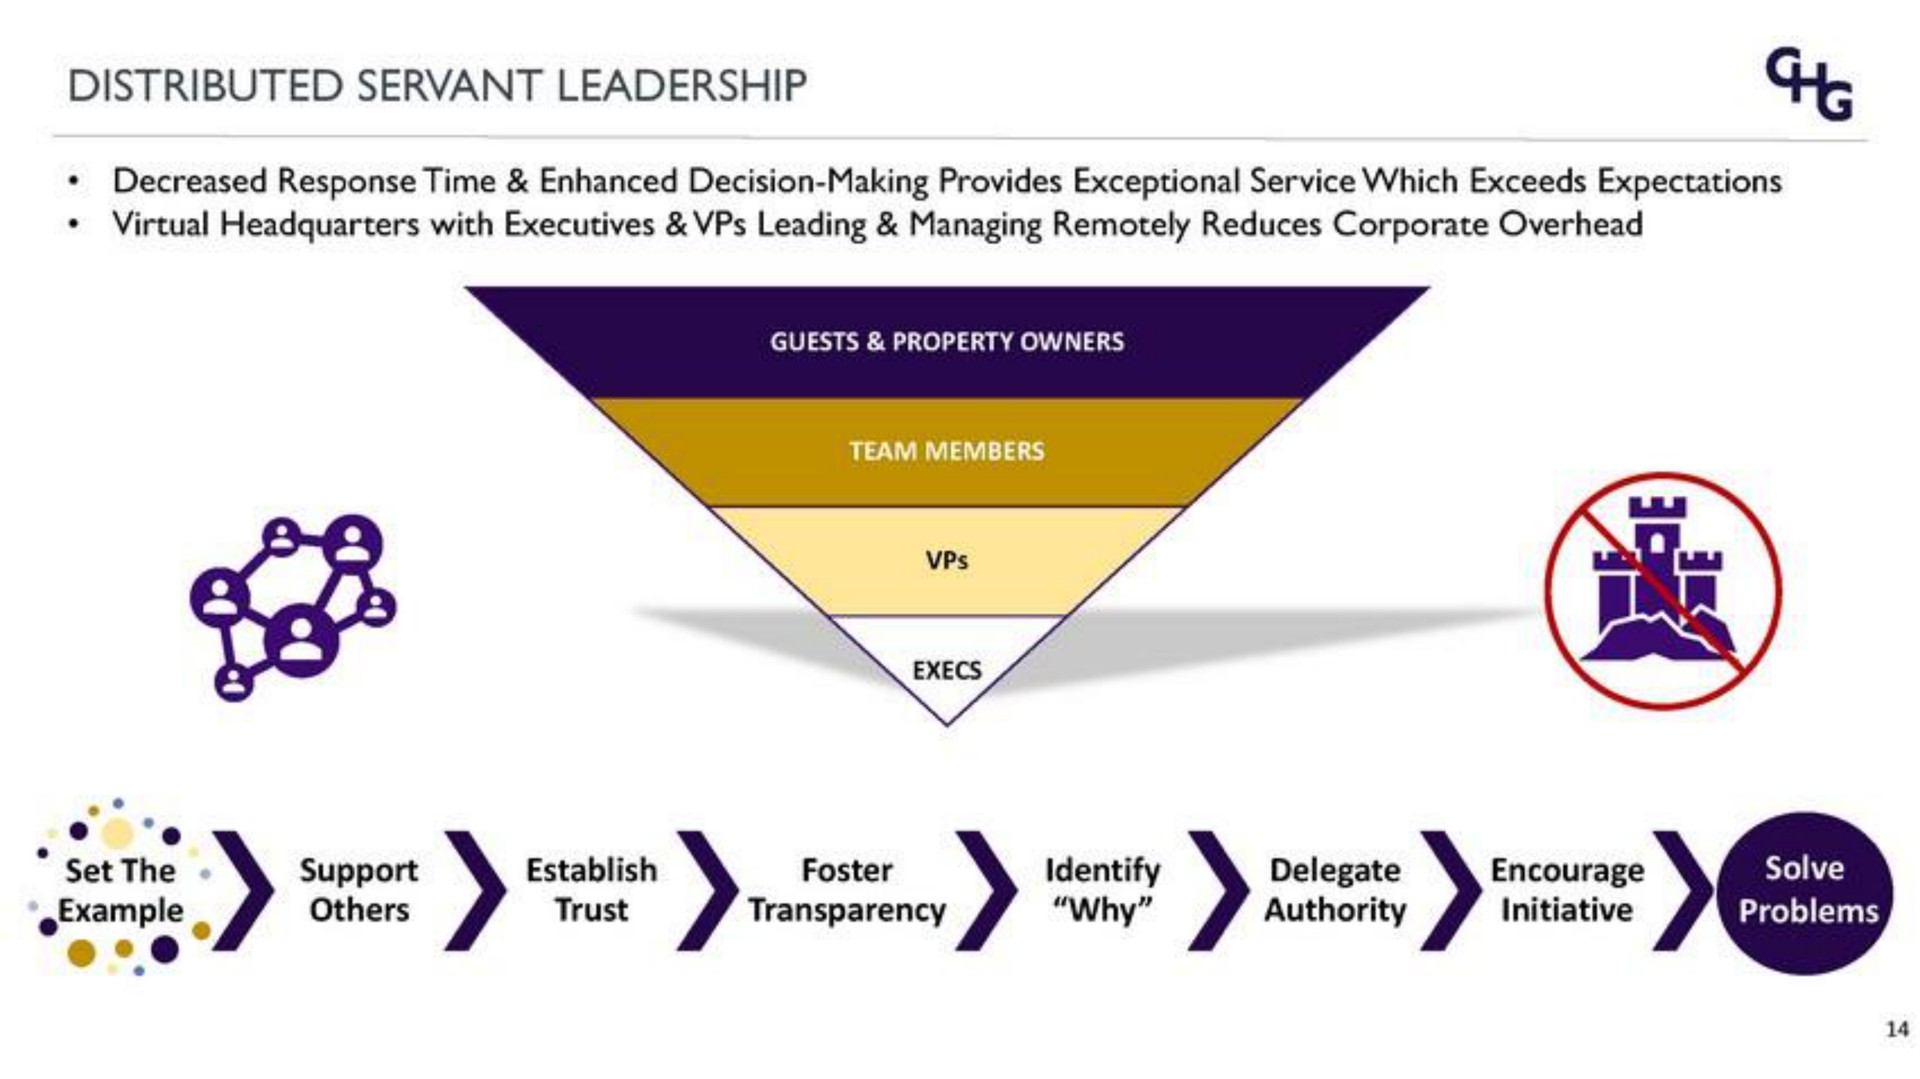 distributed servant leadership decreased response time enhanced decision making provides exceptional service which exceeds expectations virtual headquarters with executives leading managing remotely reduces corporate overhead at the support establish foster identify delegate encourage solve | Corphousing Group